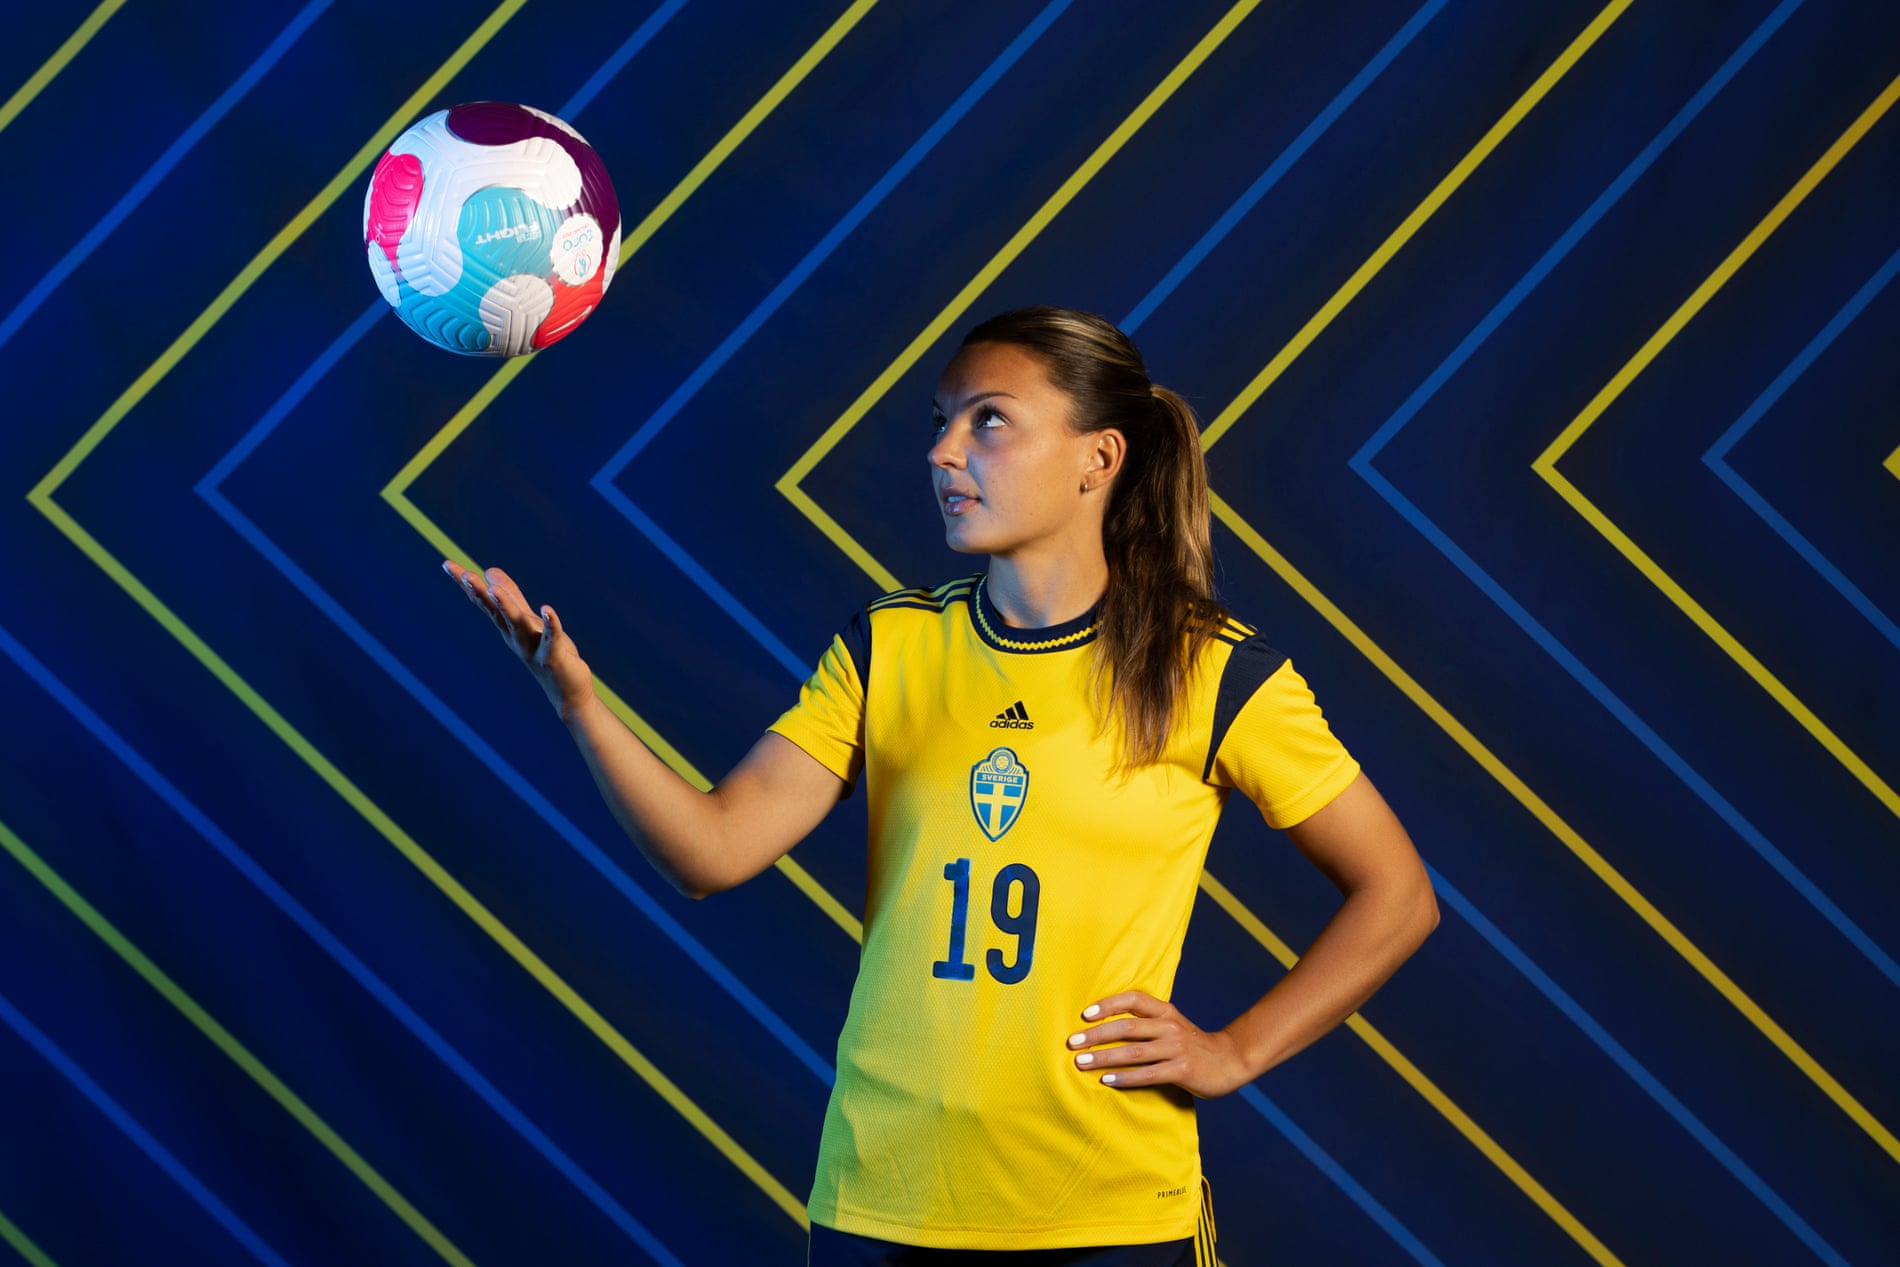 Sweden’s Johanna Rytting Kaneryd is a fast and determined player who wants ‘to win in everything I take part in’.